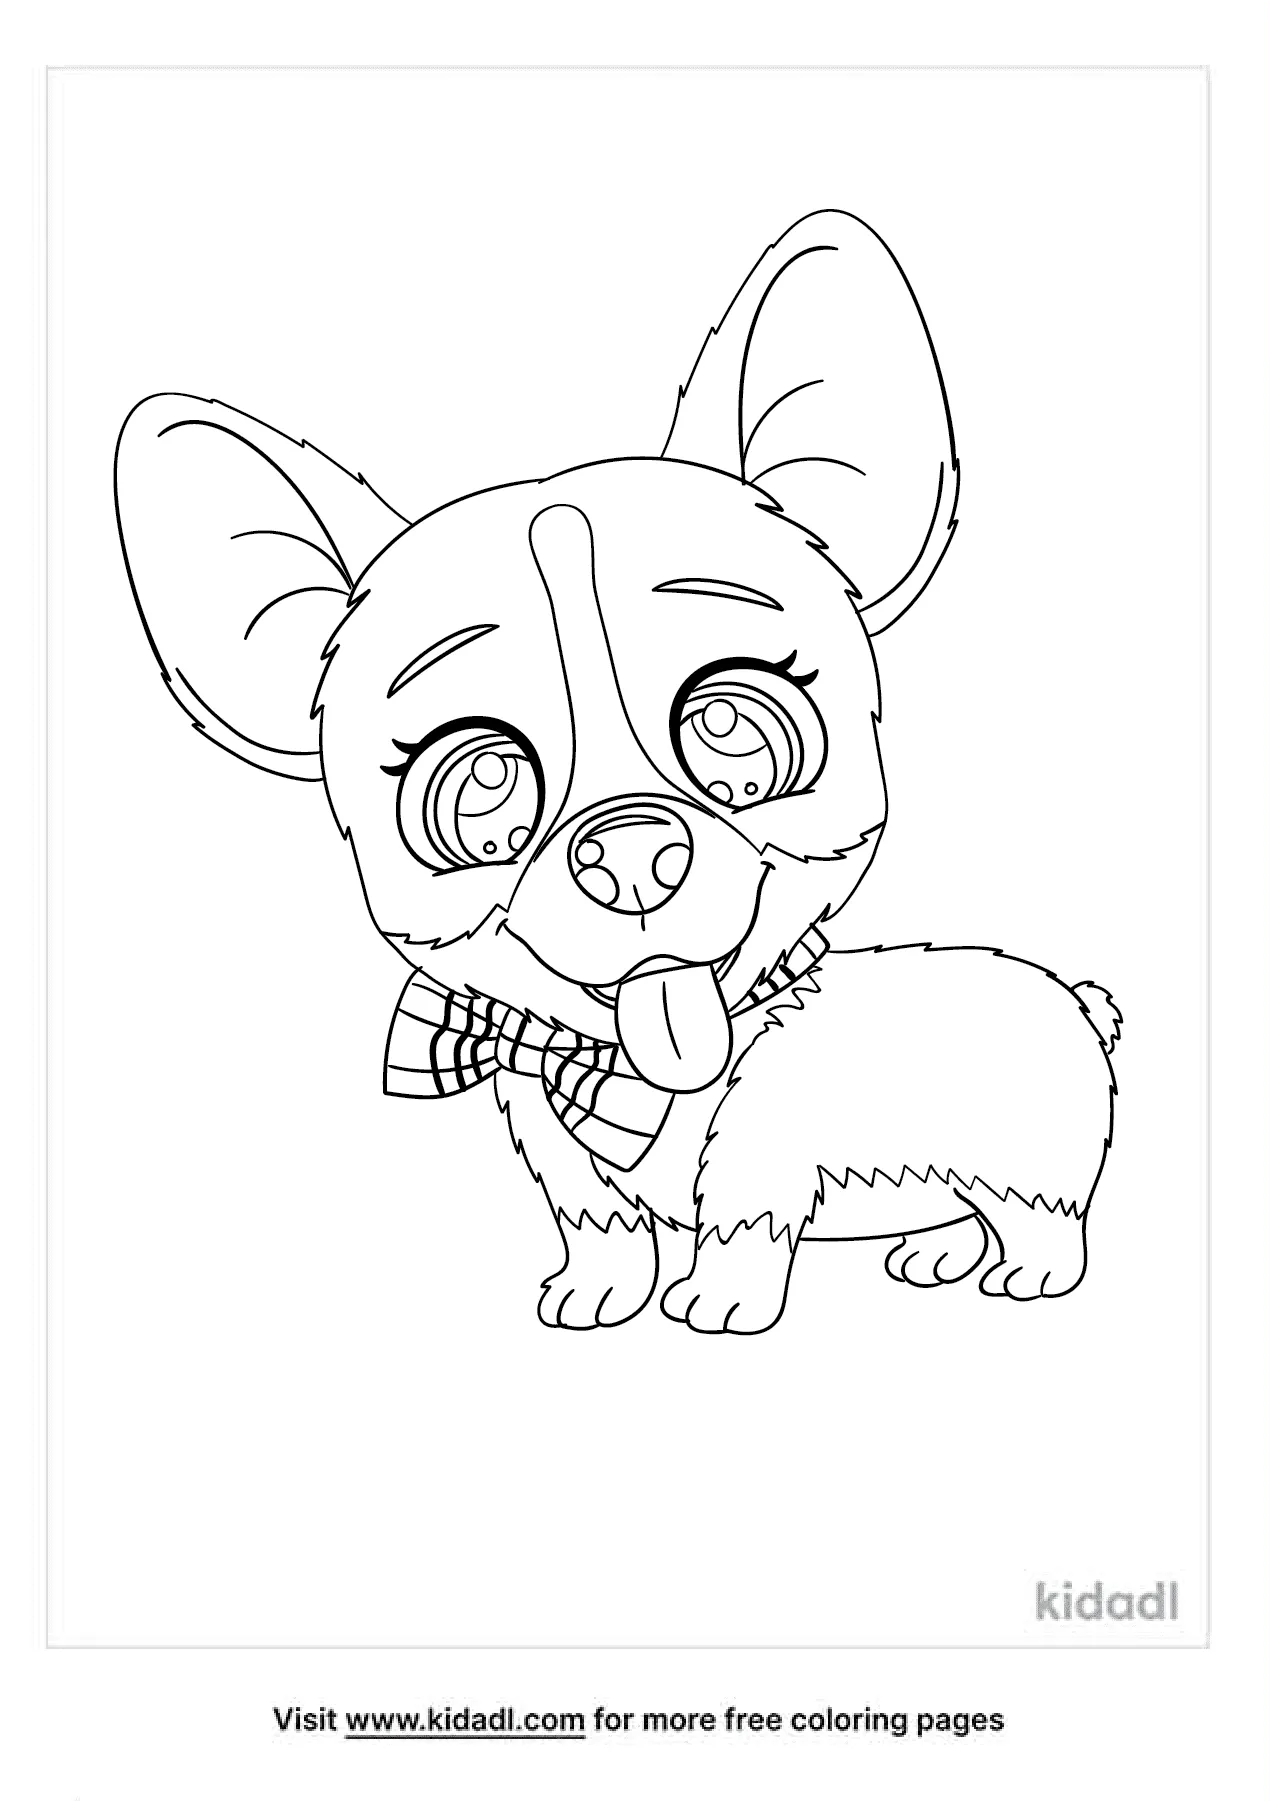 Cartoon Dog Coloring Pages   Free Animals Coloring Pages   Kidadl